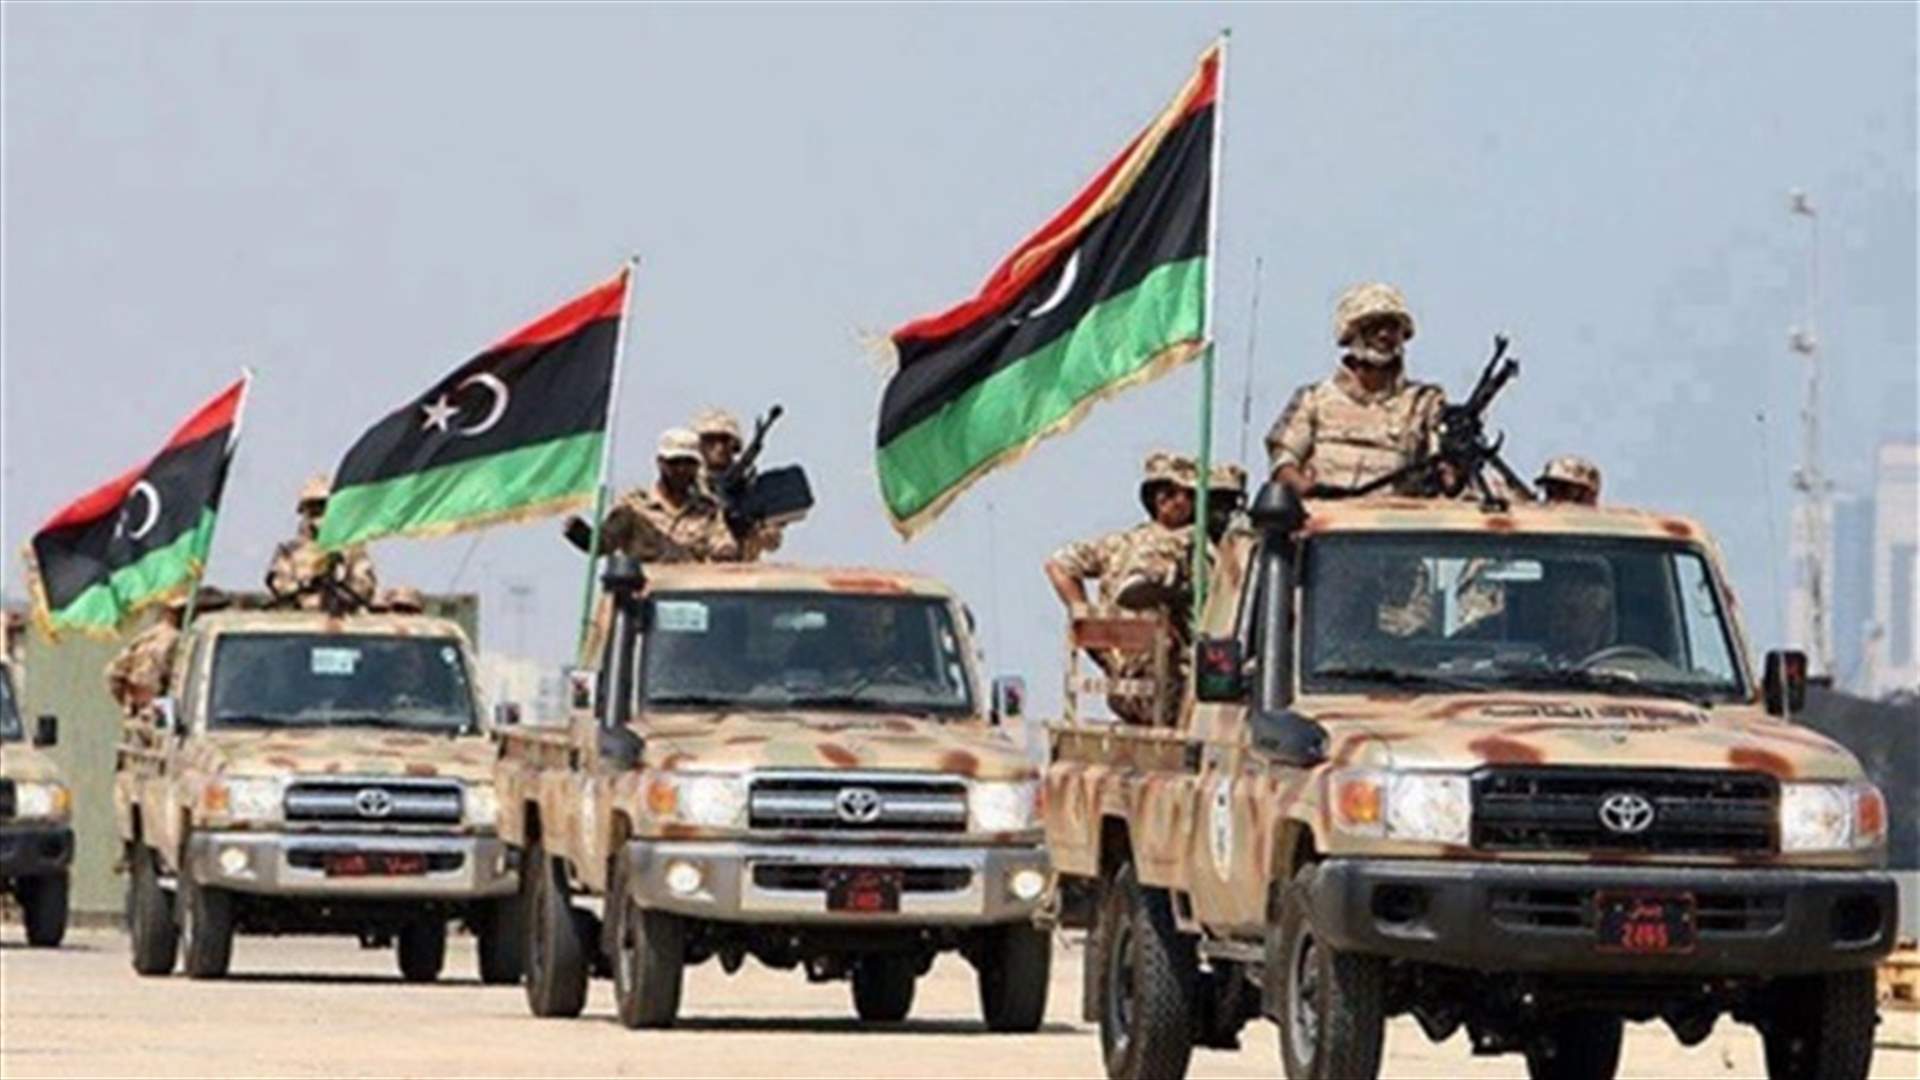 Libya forces free five foreign captives from Islamic State in Sirte